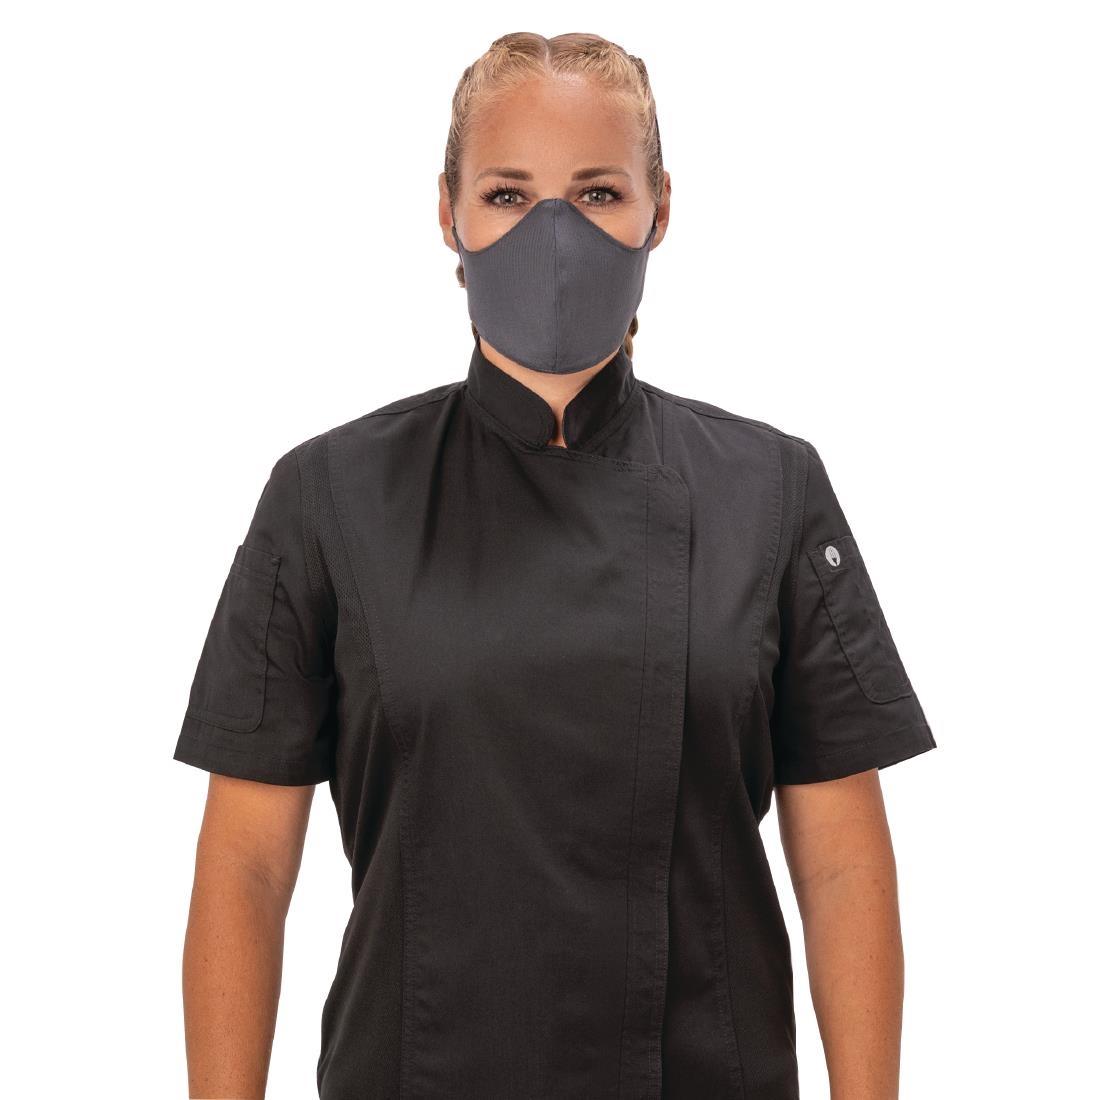 Chef Works Reusable Face Cover Pack of 6 - DG217  - 1